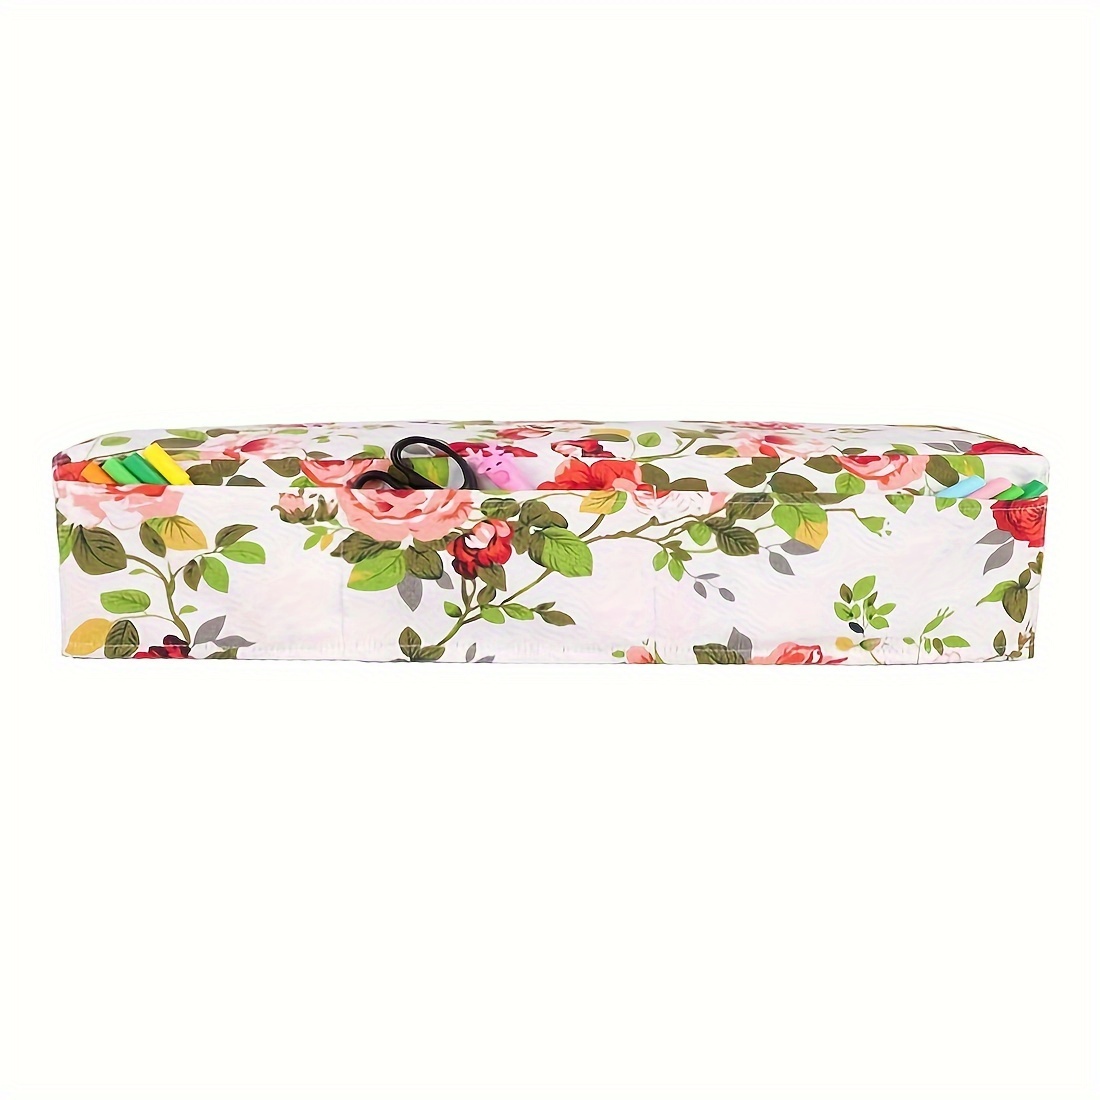 Cricut Dust Cover/cricut/fabric/cover/gifts/craftroom/craft 